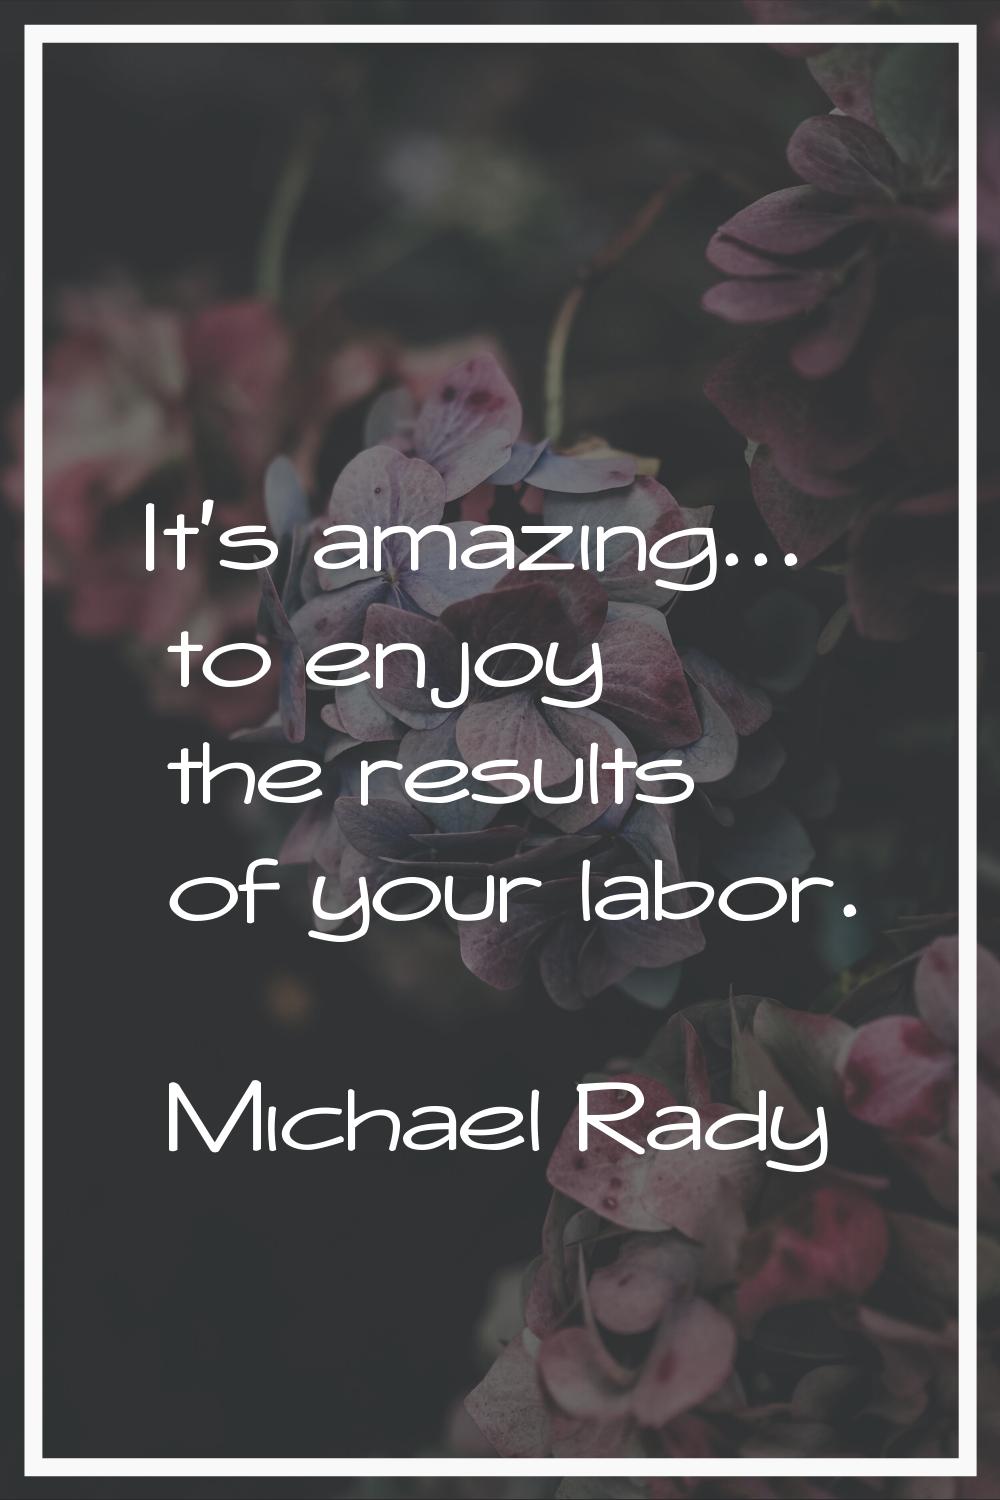 It's amazing... to enjoy the results of your labor.